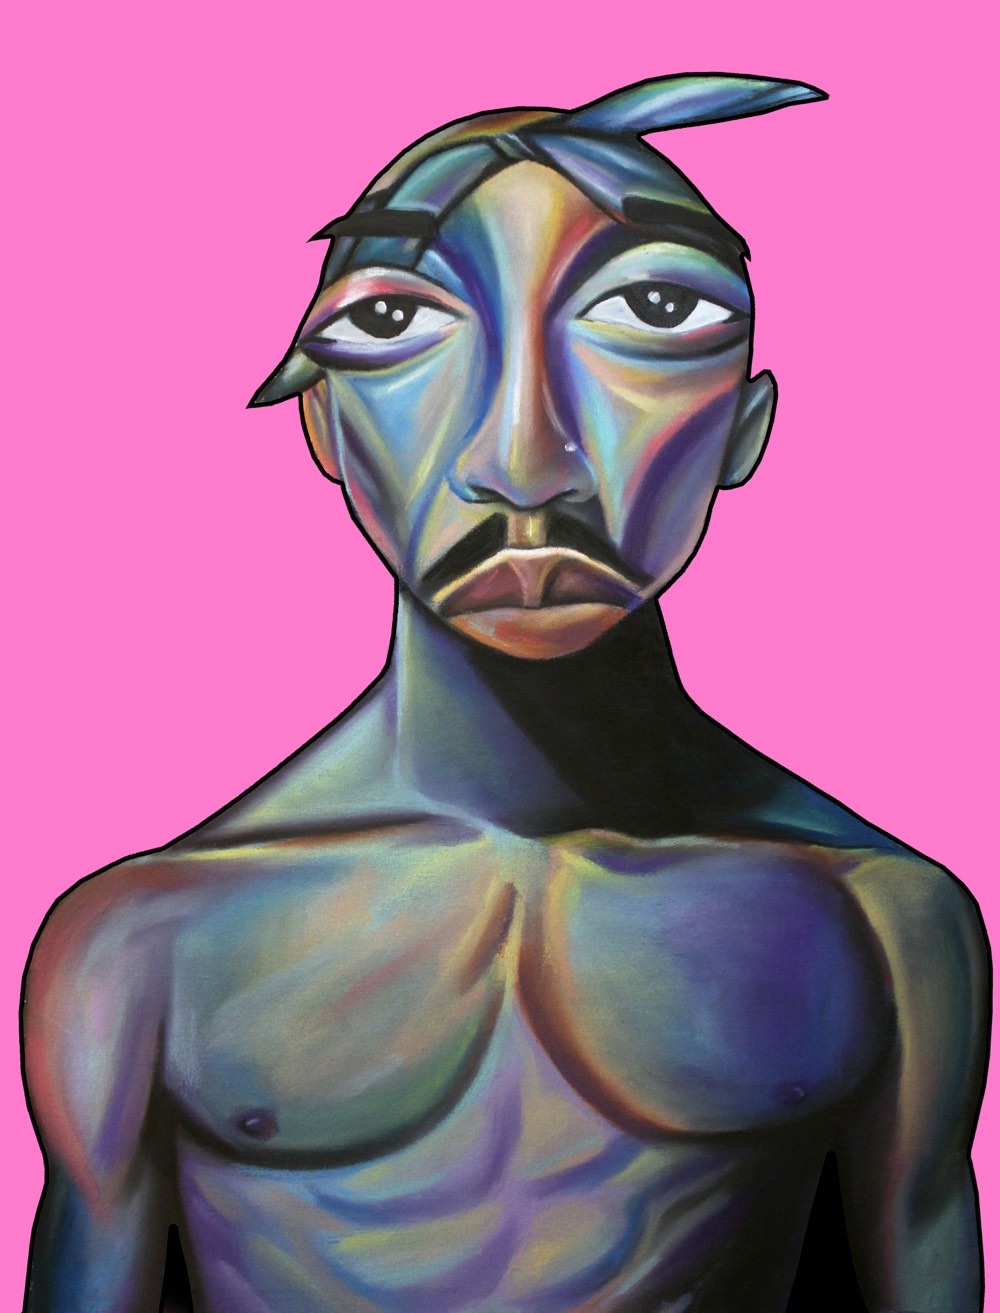 Alim Smith's Surreal Paintings Pay Homage To Black Icons And Memes